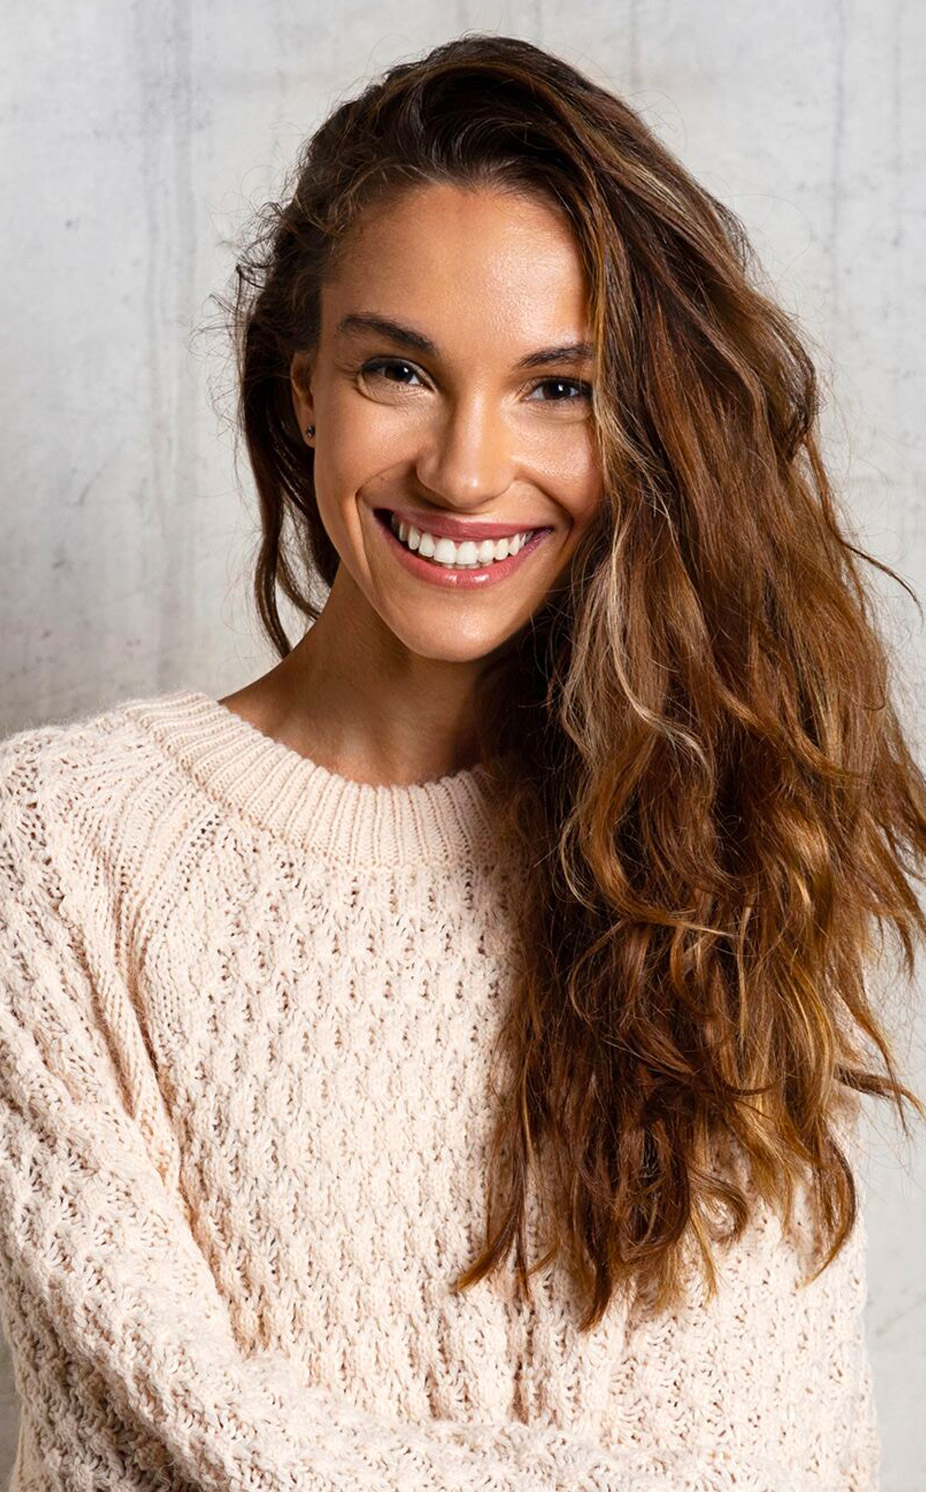 woman smiling in a sweater